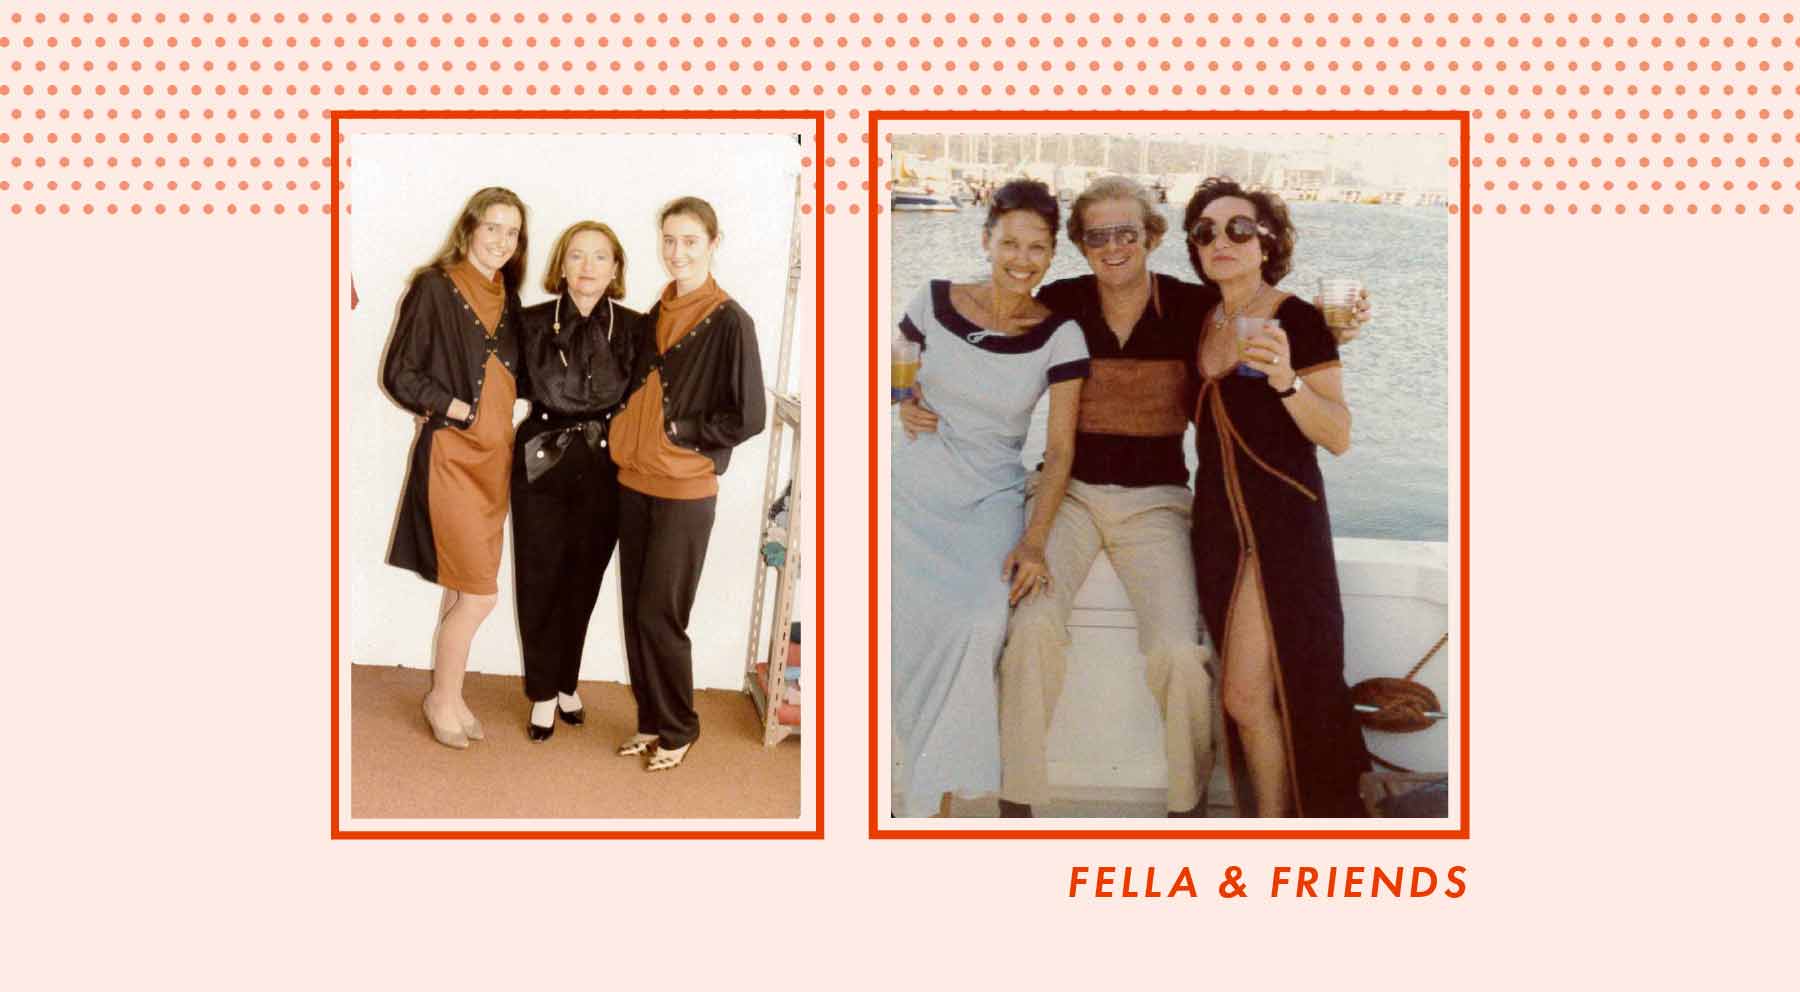 Fella photographed with her friends